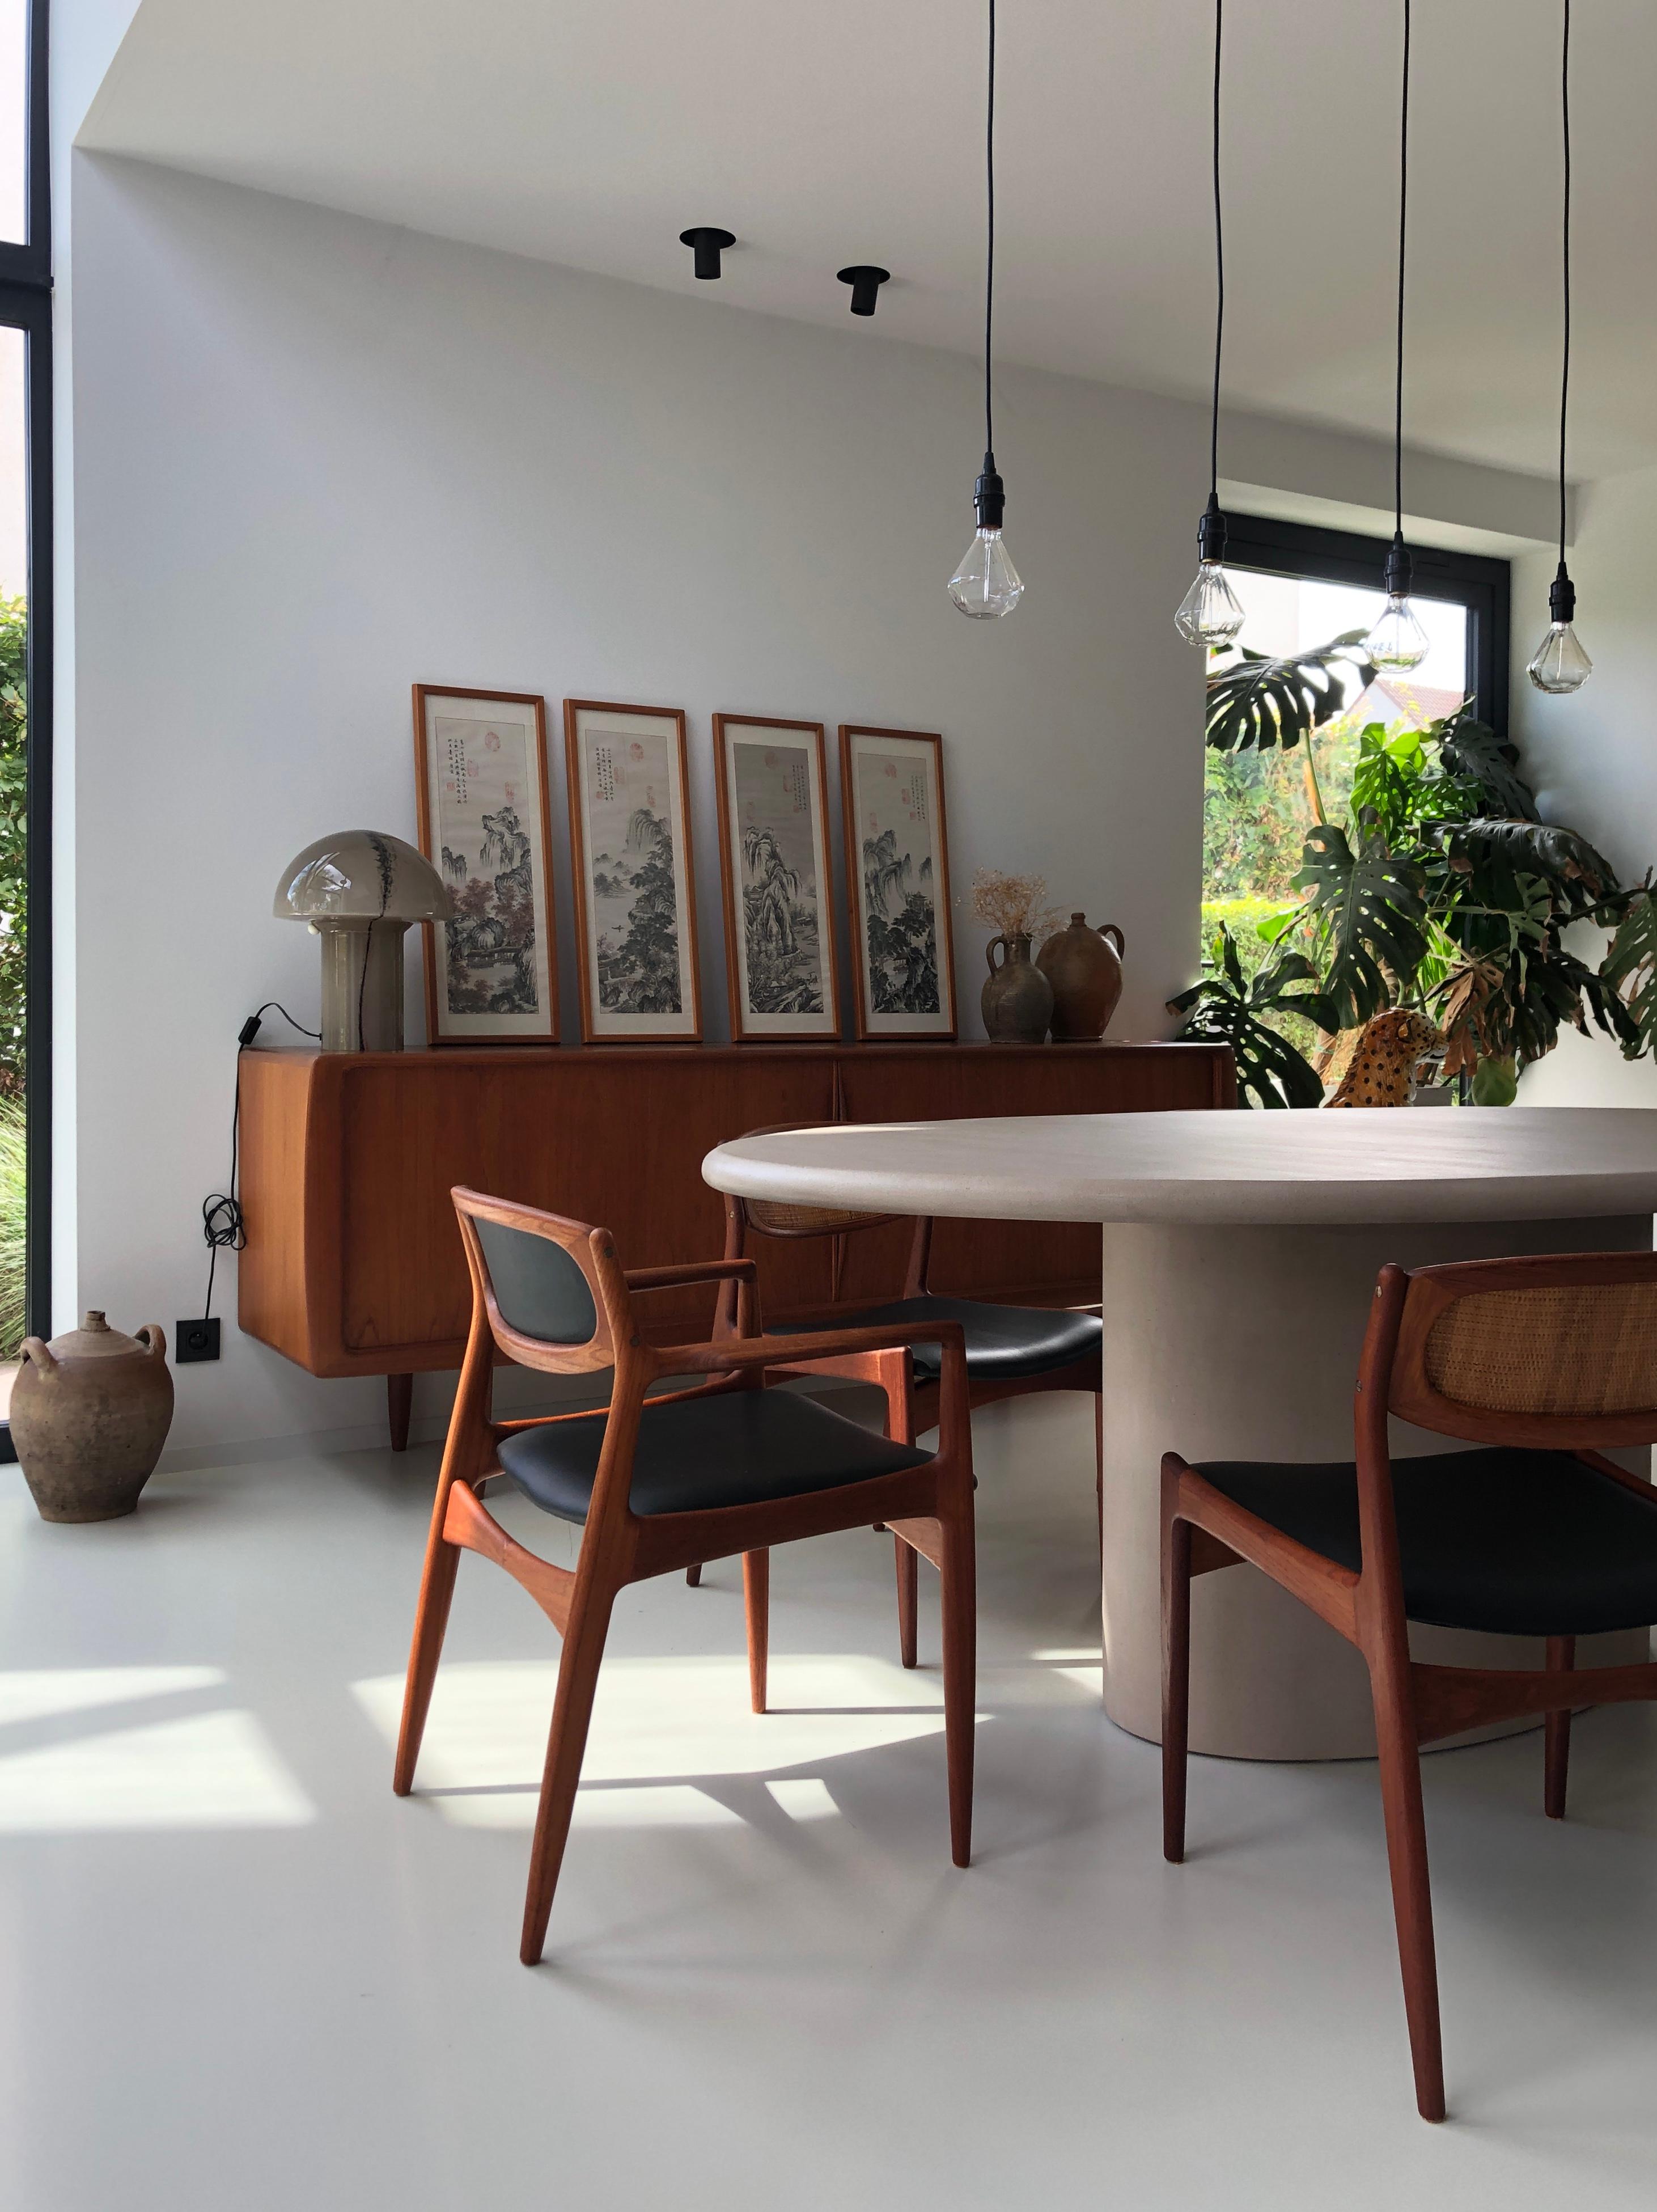 Contemporary Belgian design / Handcrafted / Organic shape / Ecological material / Natural lime plaster / Concrete look / Stock model

The name of the Sami collection is a combination of the Dutch word 'samen' (together) and the Japanese word 'Sabi'